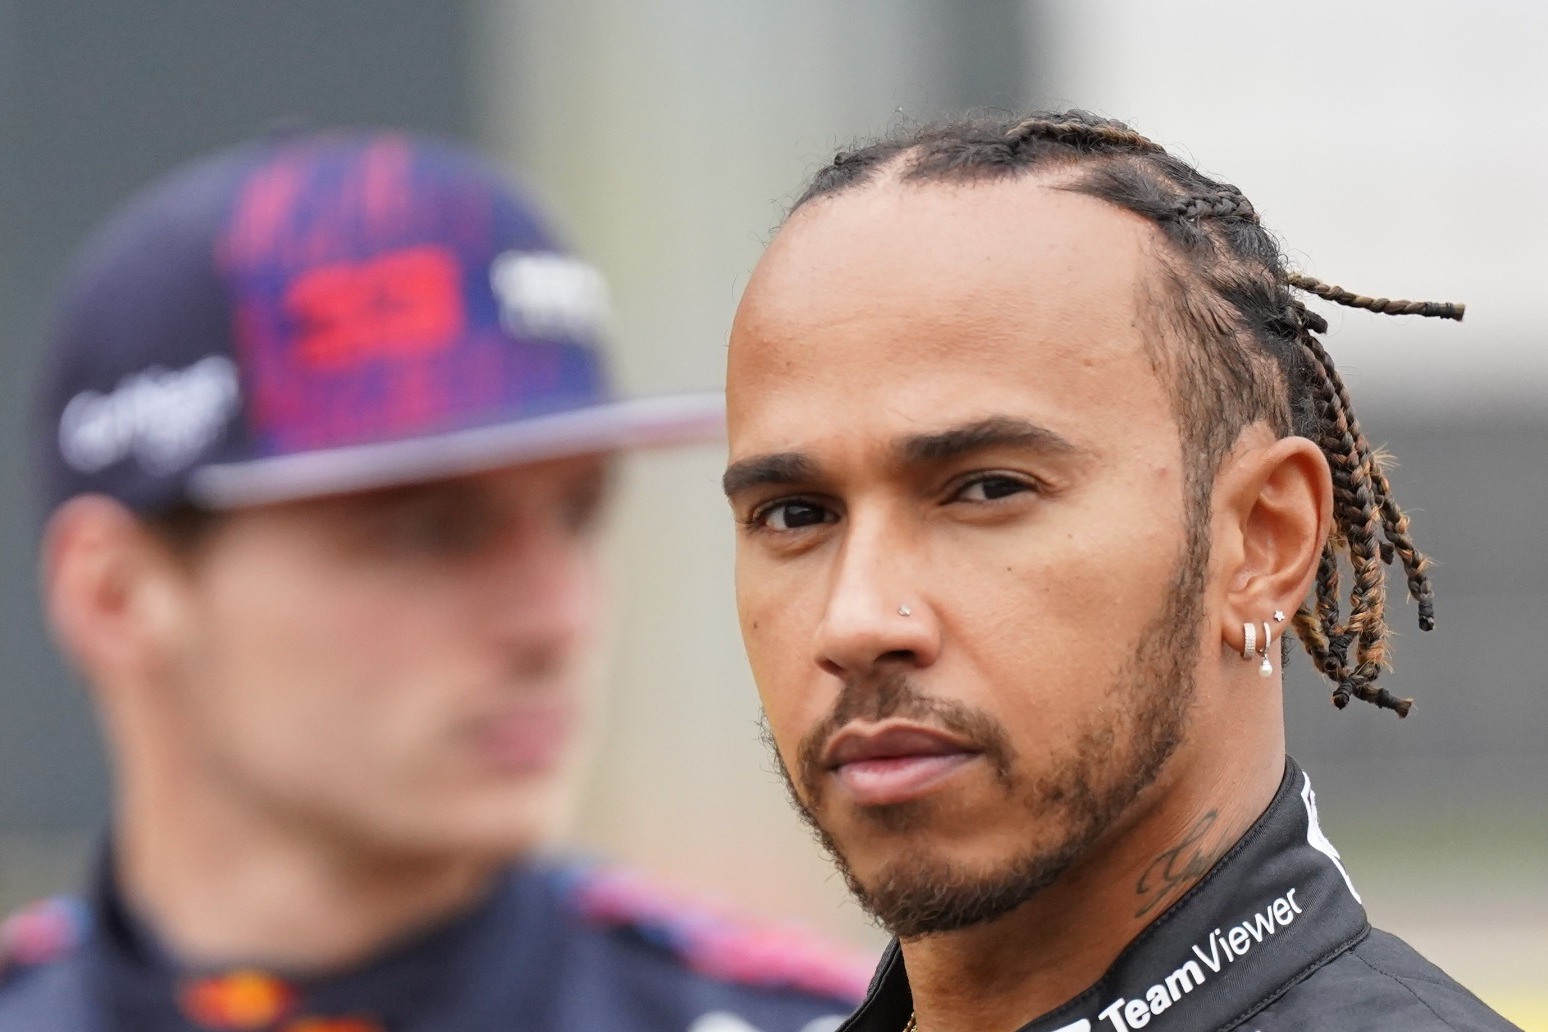 Lewis Hamilton I have struggled mentally and emotionally for a long time